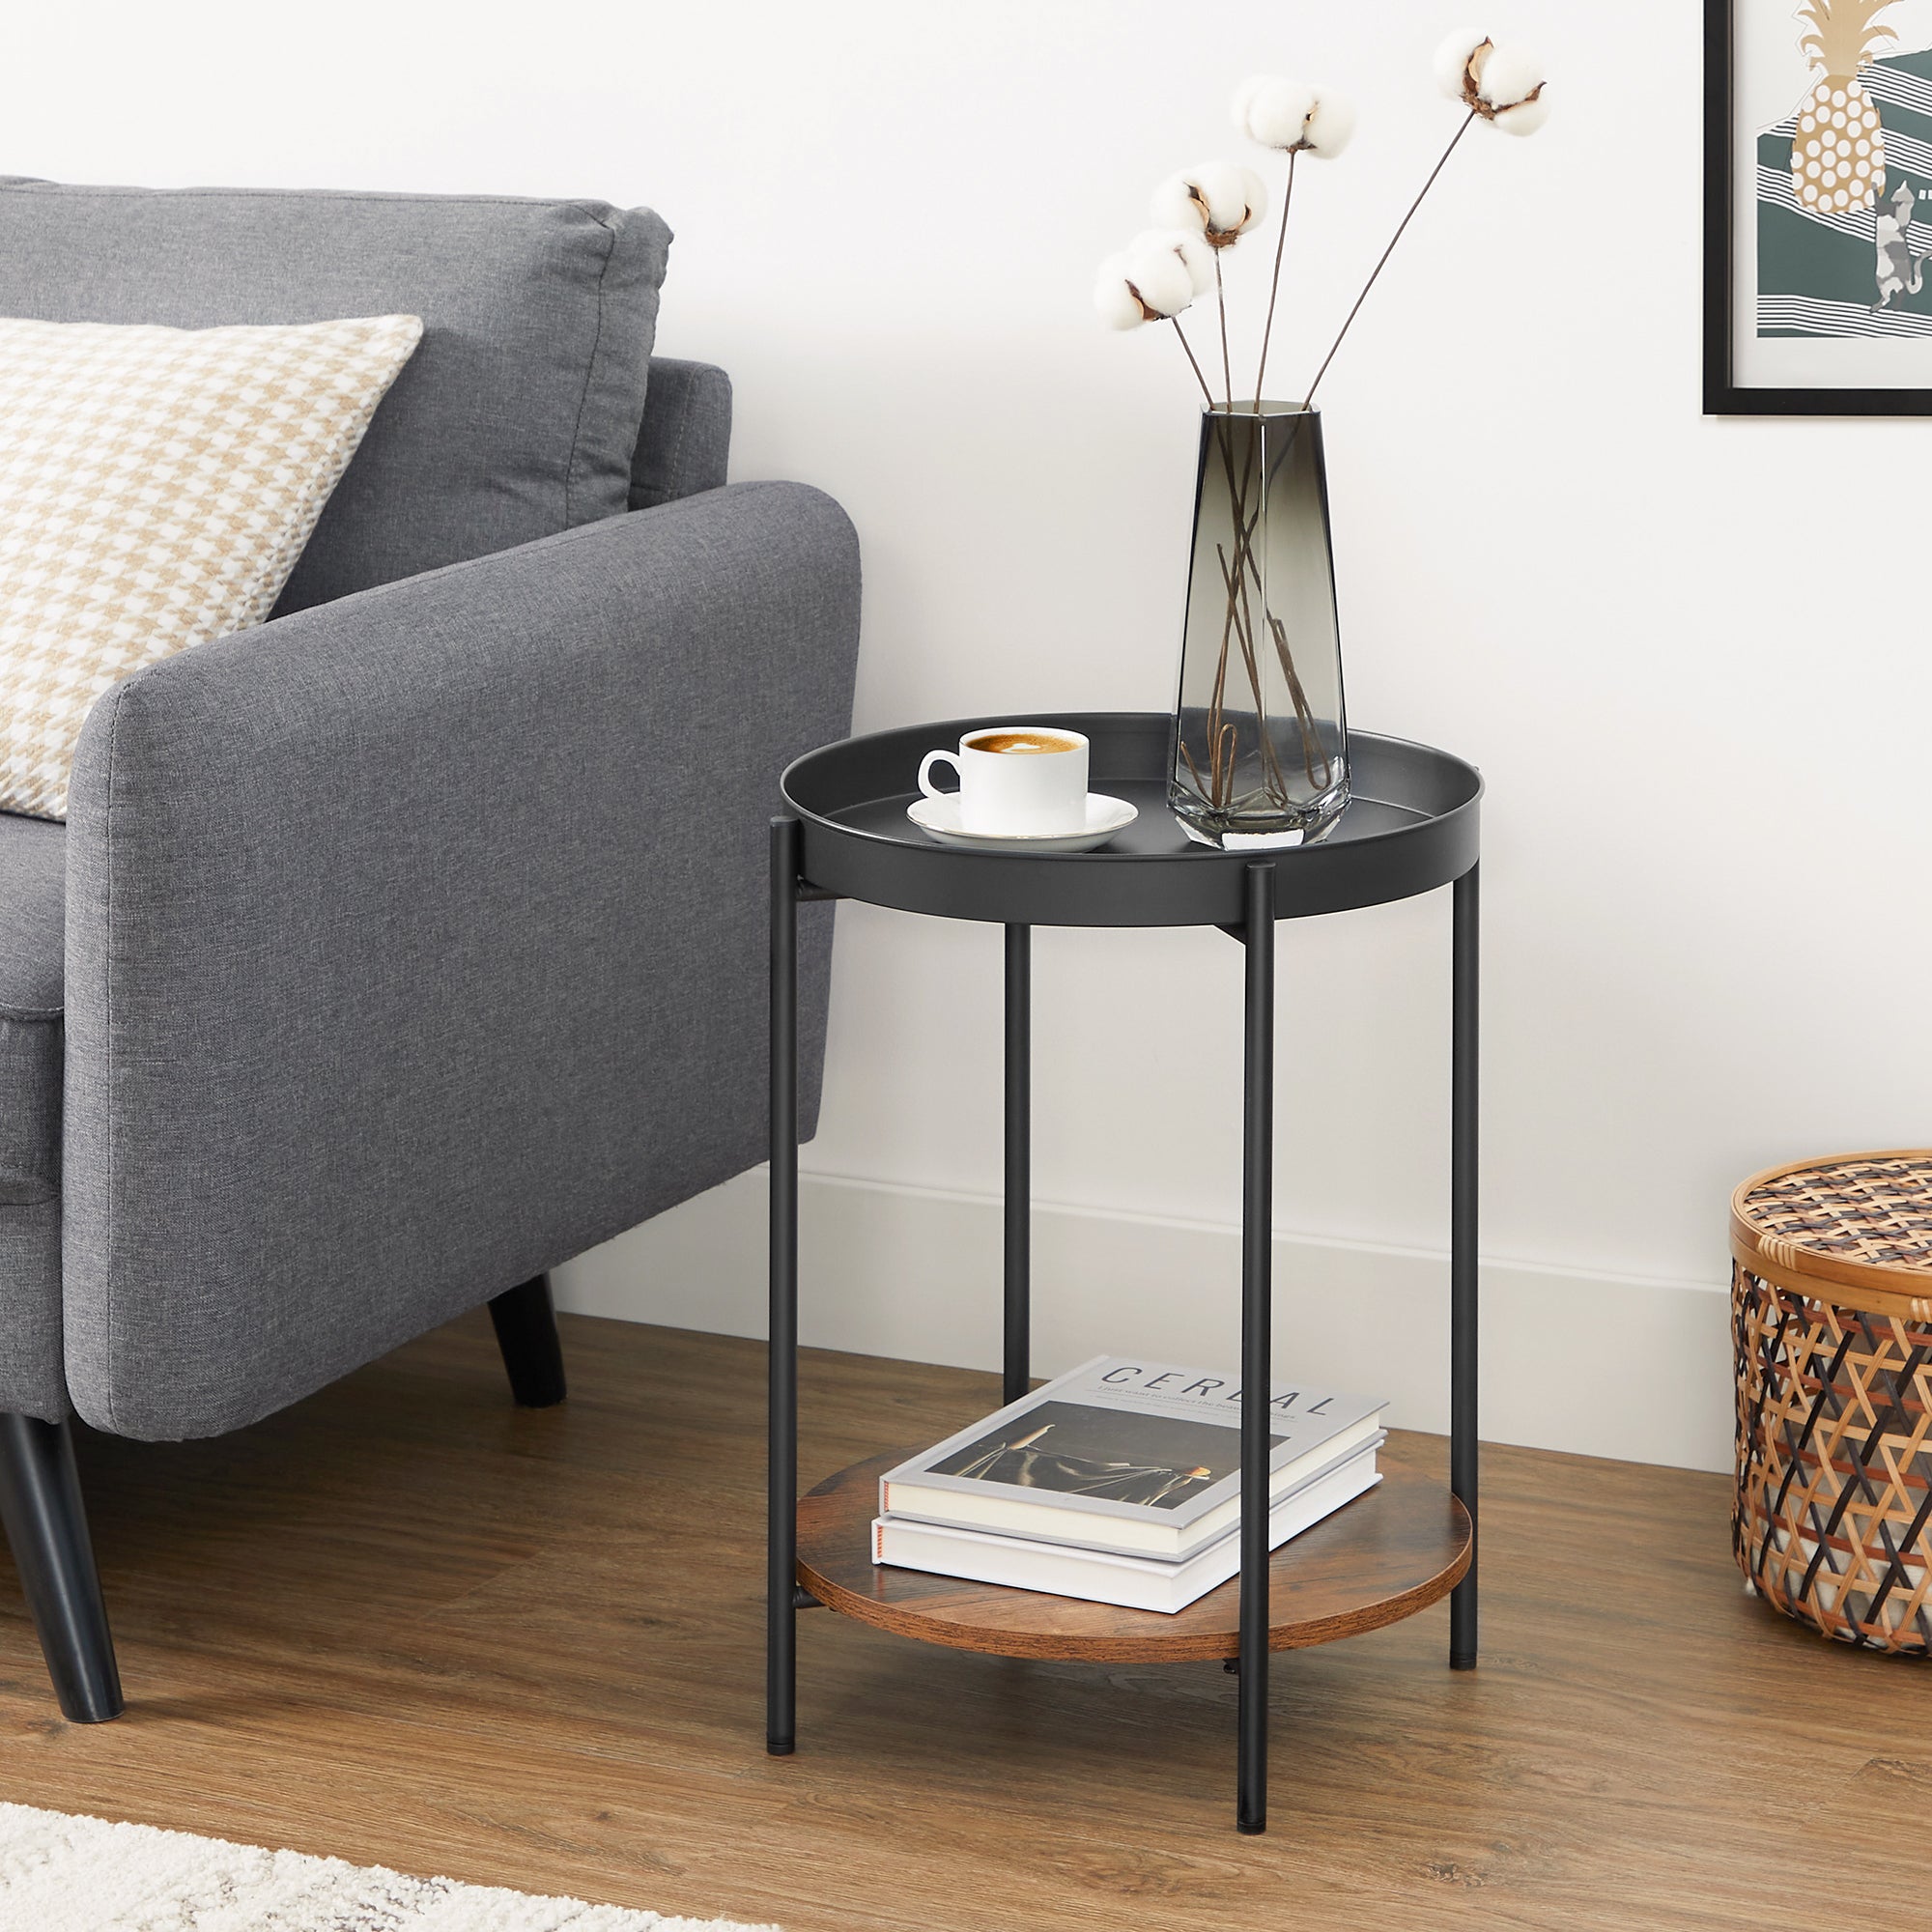 Vasagle Stylish Bedside Table round Side Table End Table